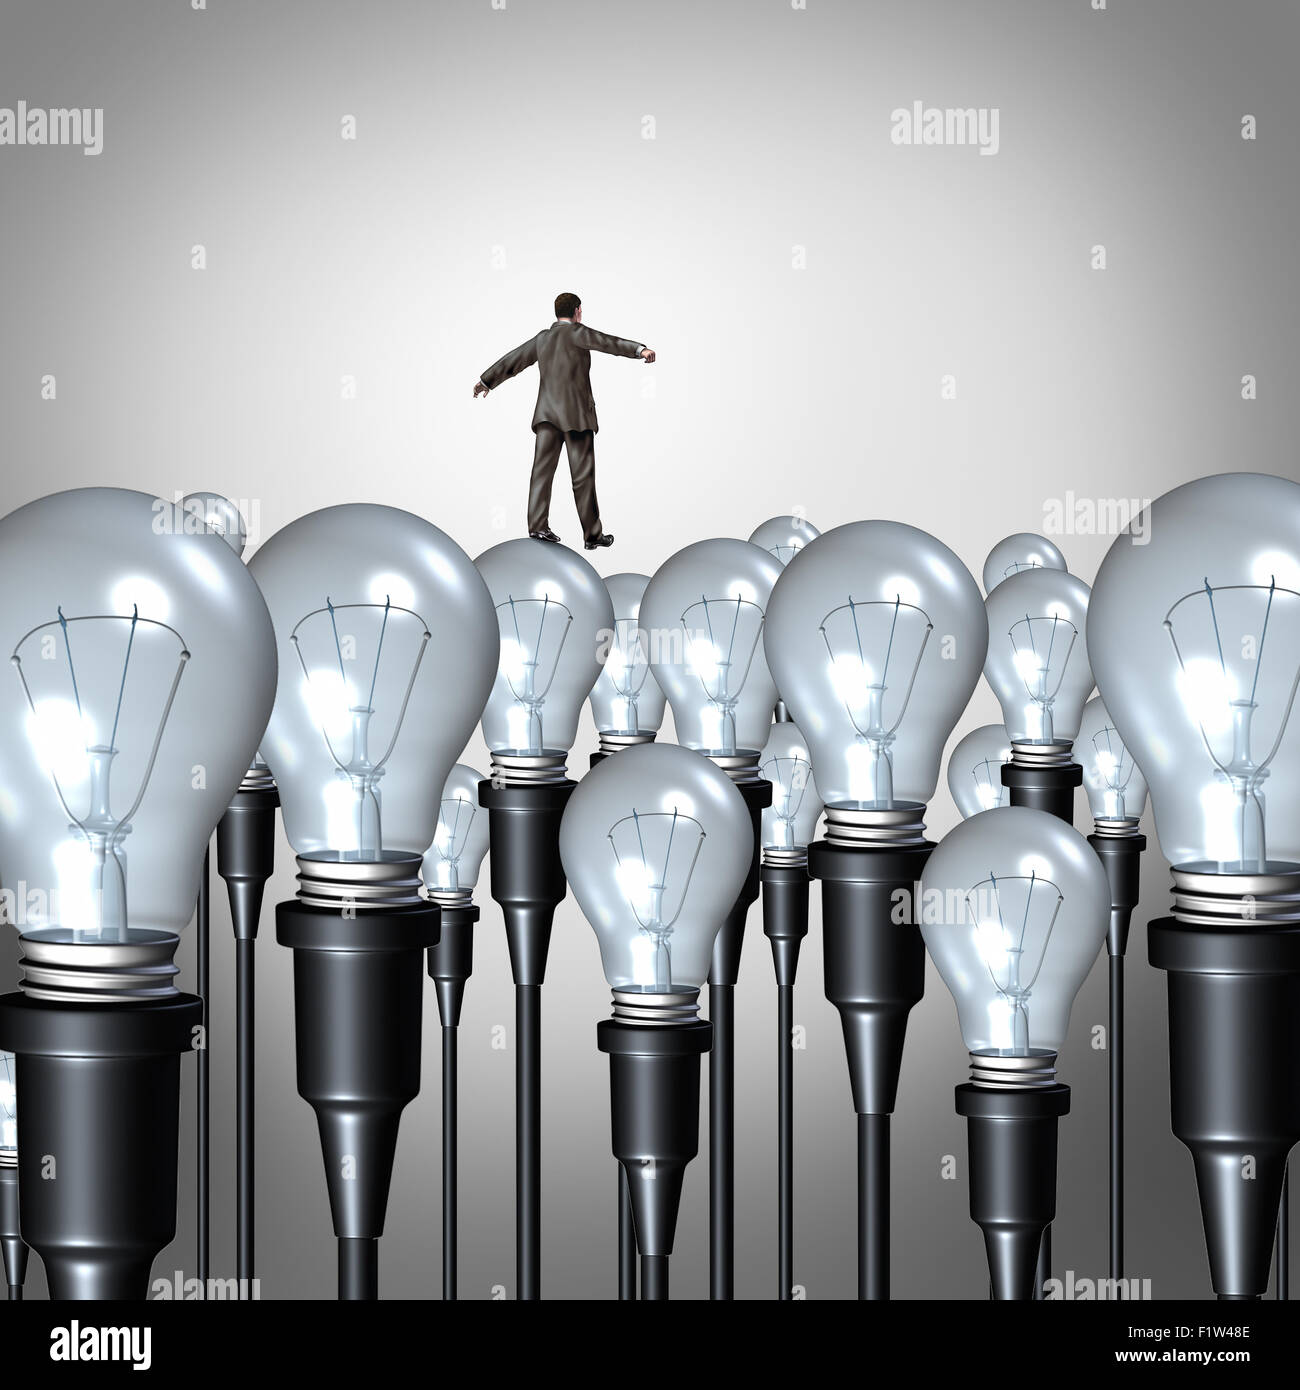 Creativity management concept and business idea challenge symbol as a businessman walking carefully on a group of lightbulbs as Stock Photo